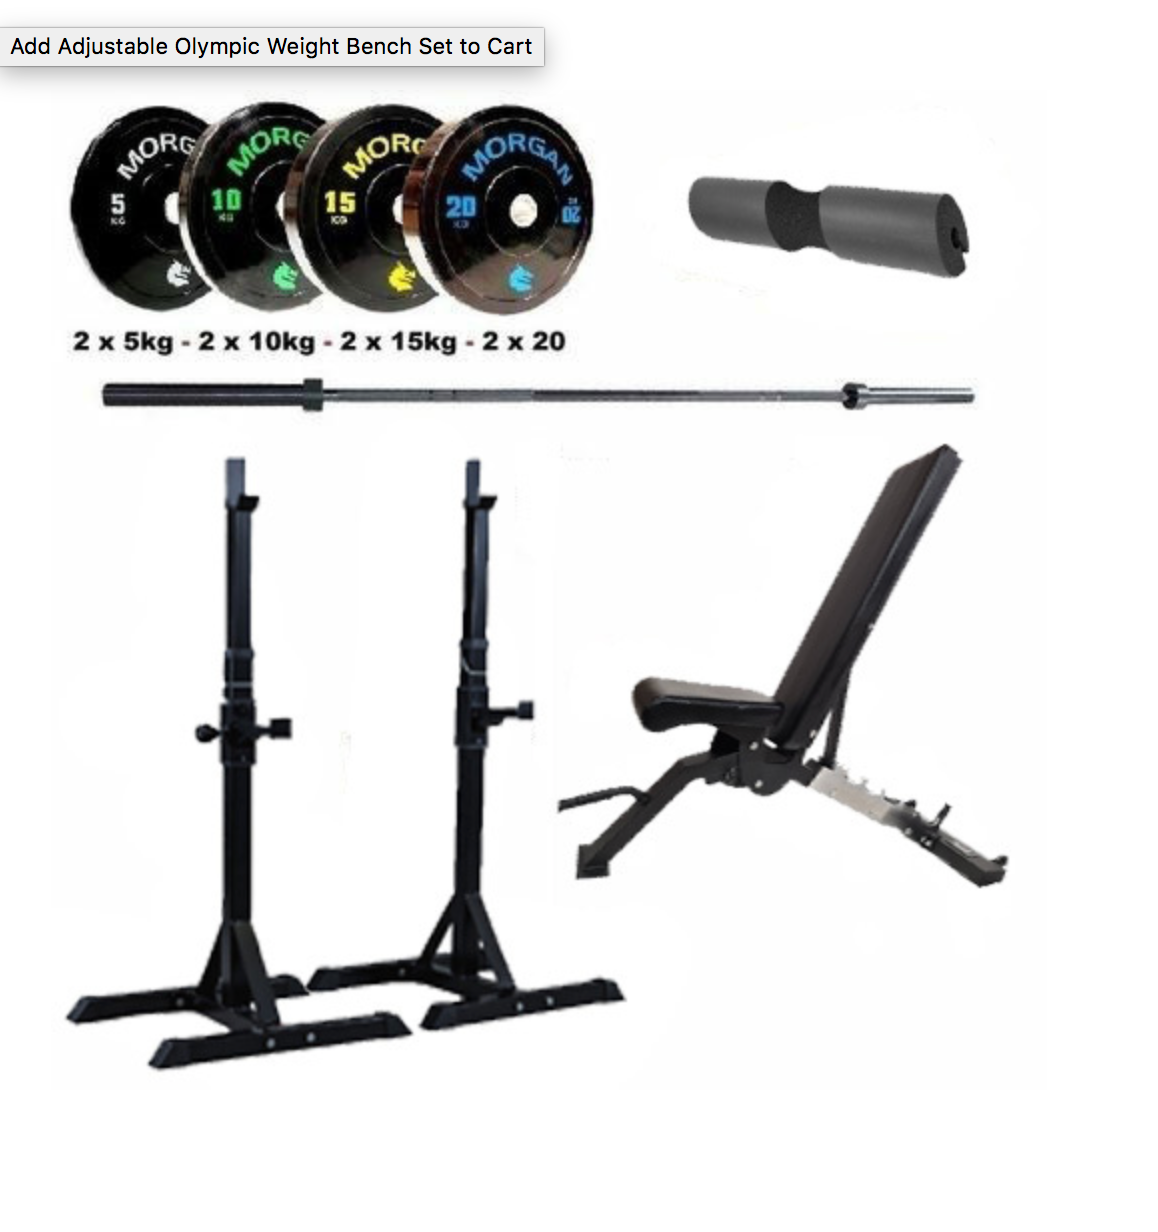 ADJUSTABLE OLYMPIC WEIGHT BENCH SET